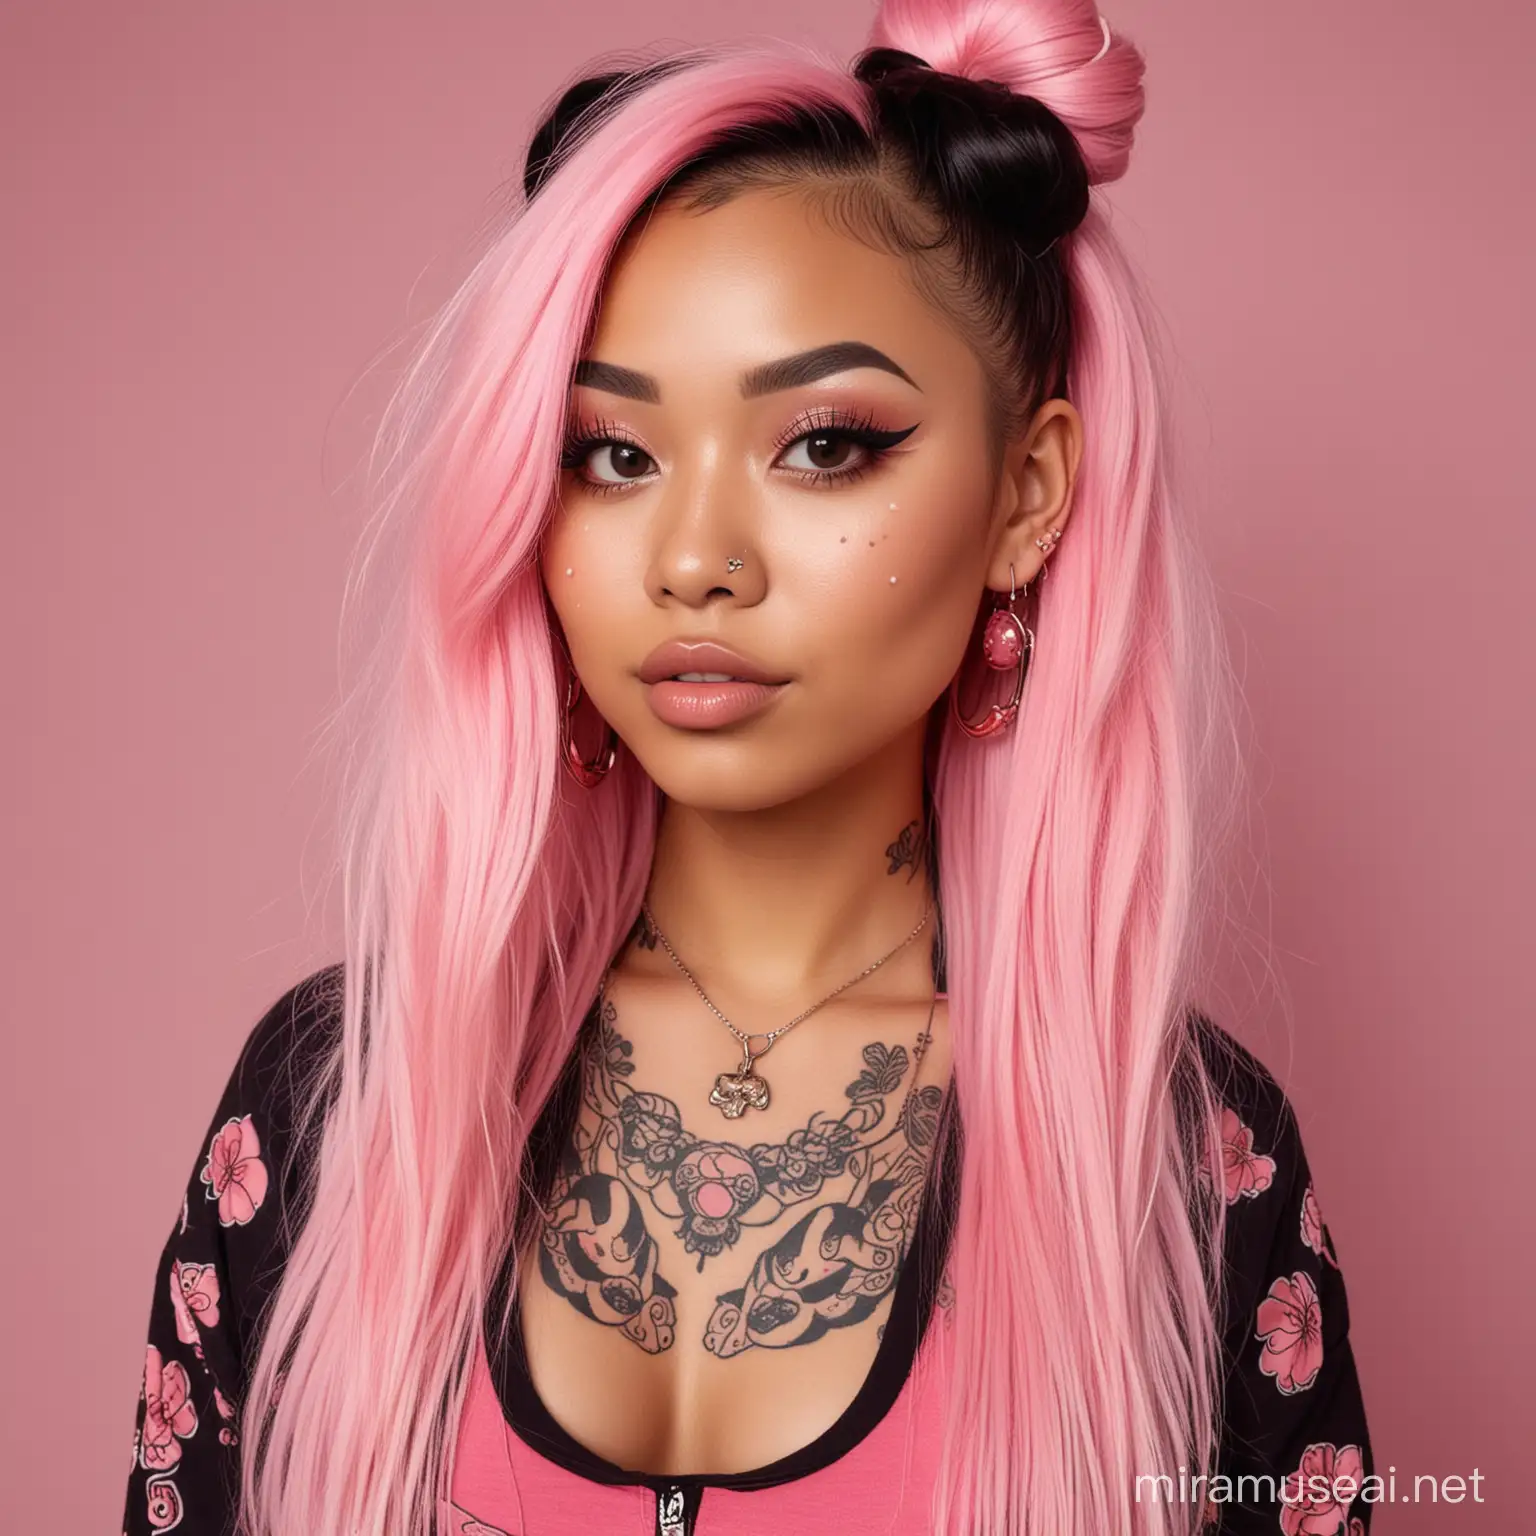 A beautiful blasian woman with a warm honey skin tone, with long, full black and pink hair. She has a septum piercing and small gauges in her ears.She has thick body figure and is wearing modern kawaii clothing. She has lots of tattoos and is celebrating the lunar new year